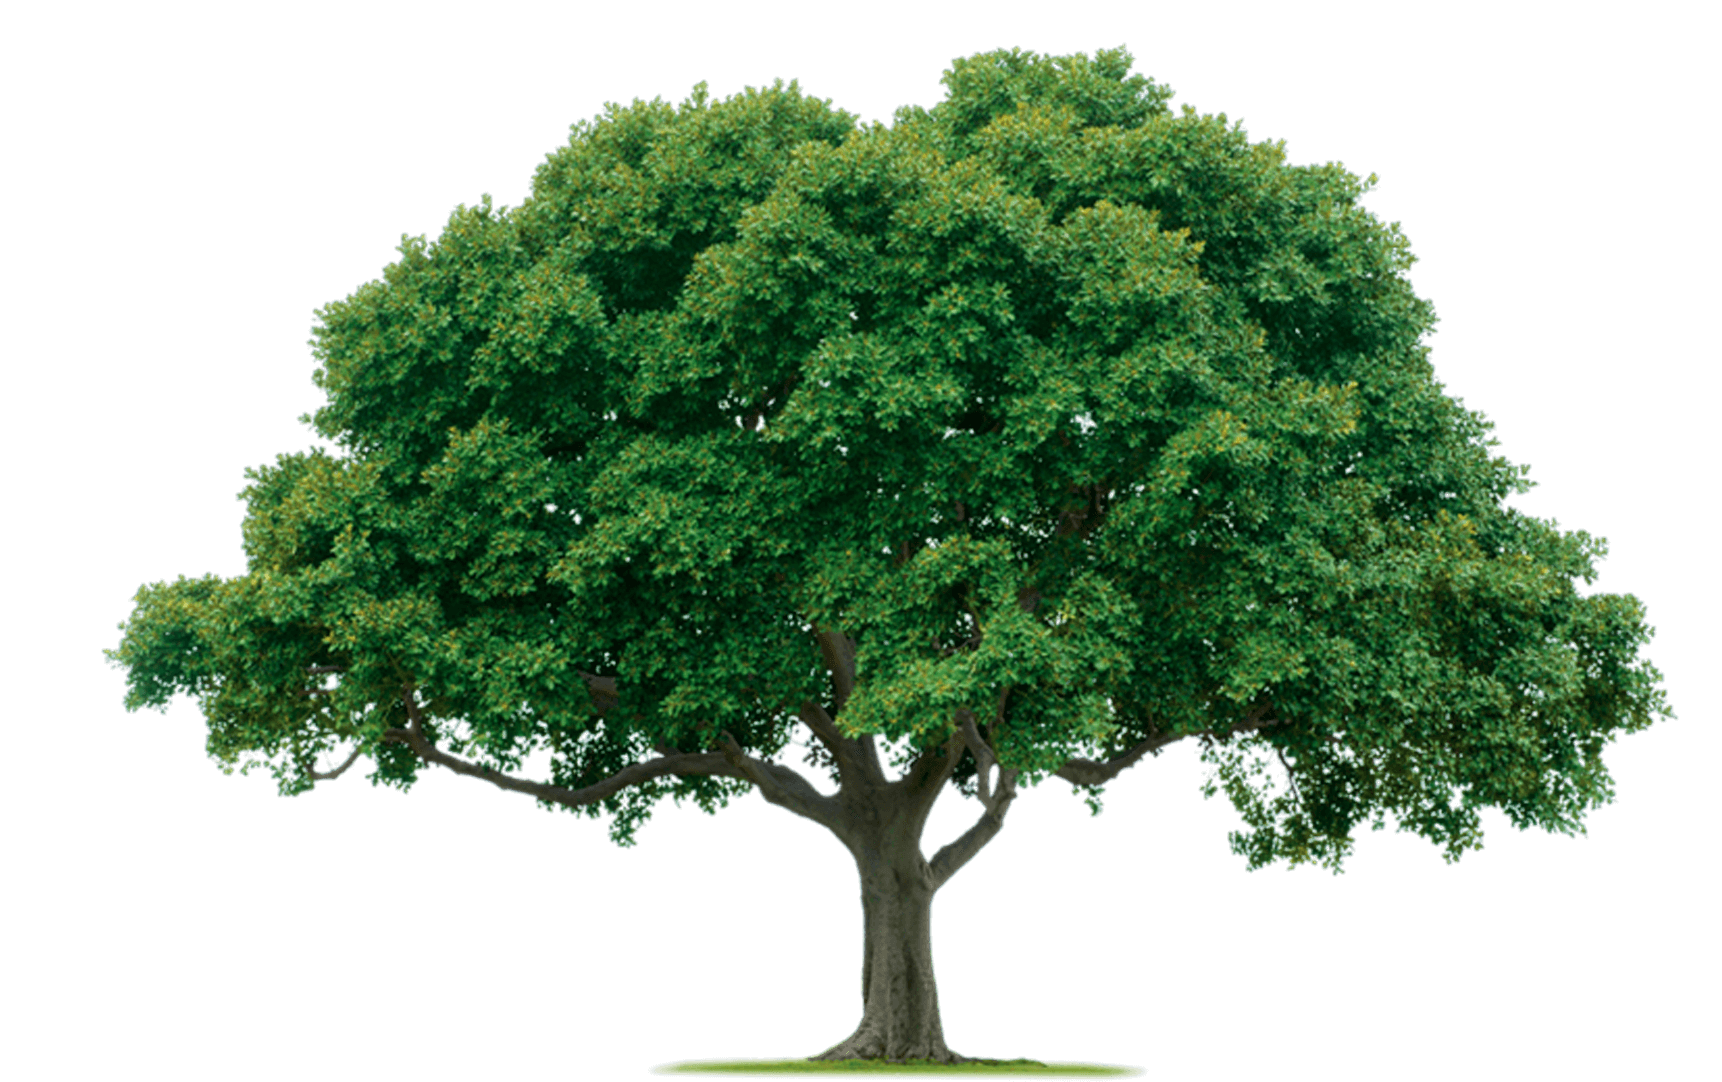 tree-png-from-pngfre-36